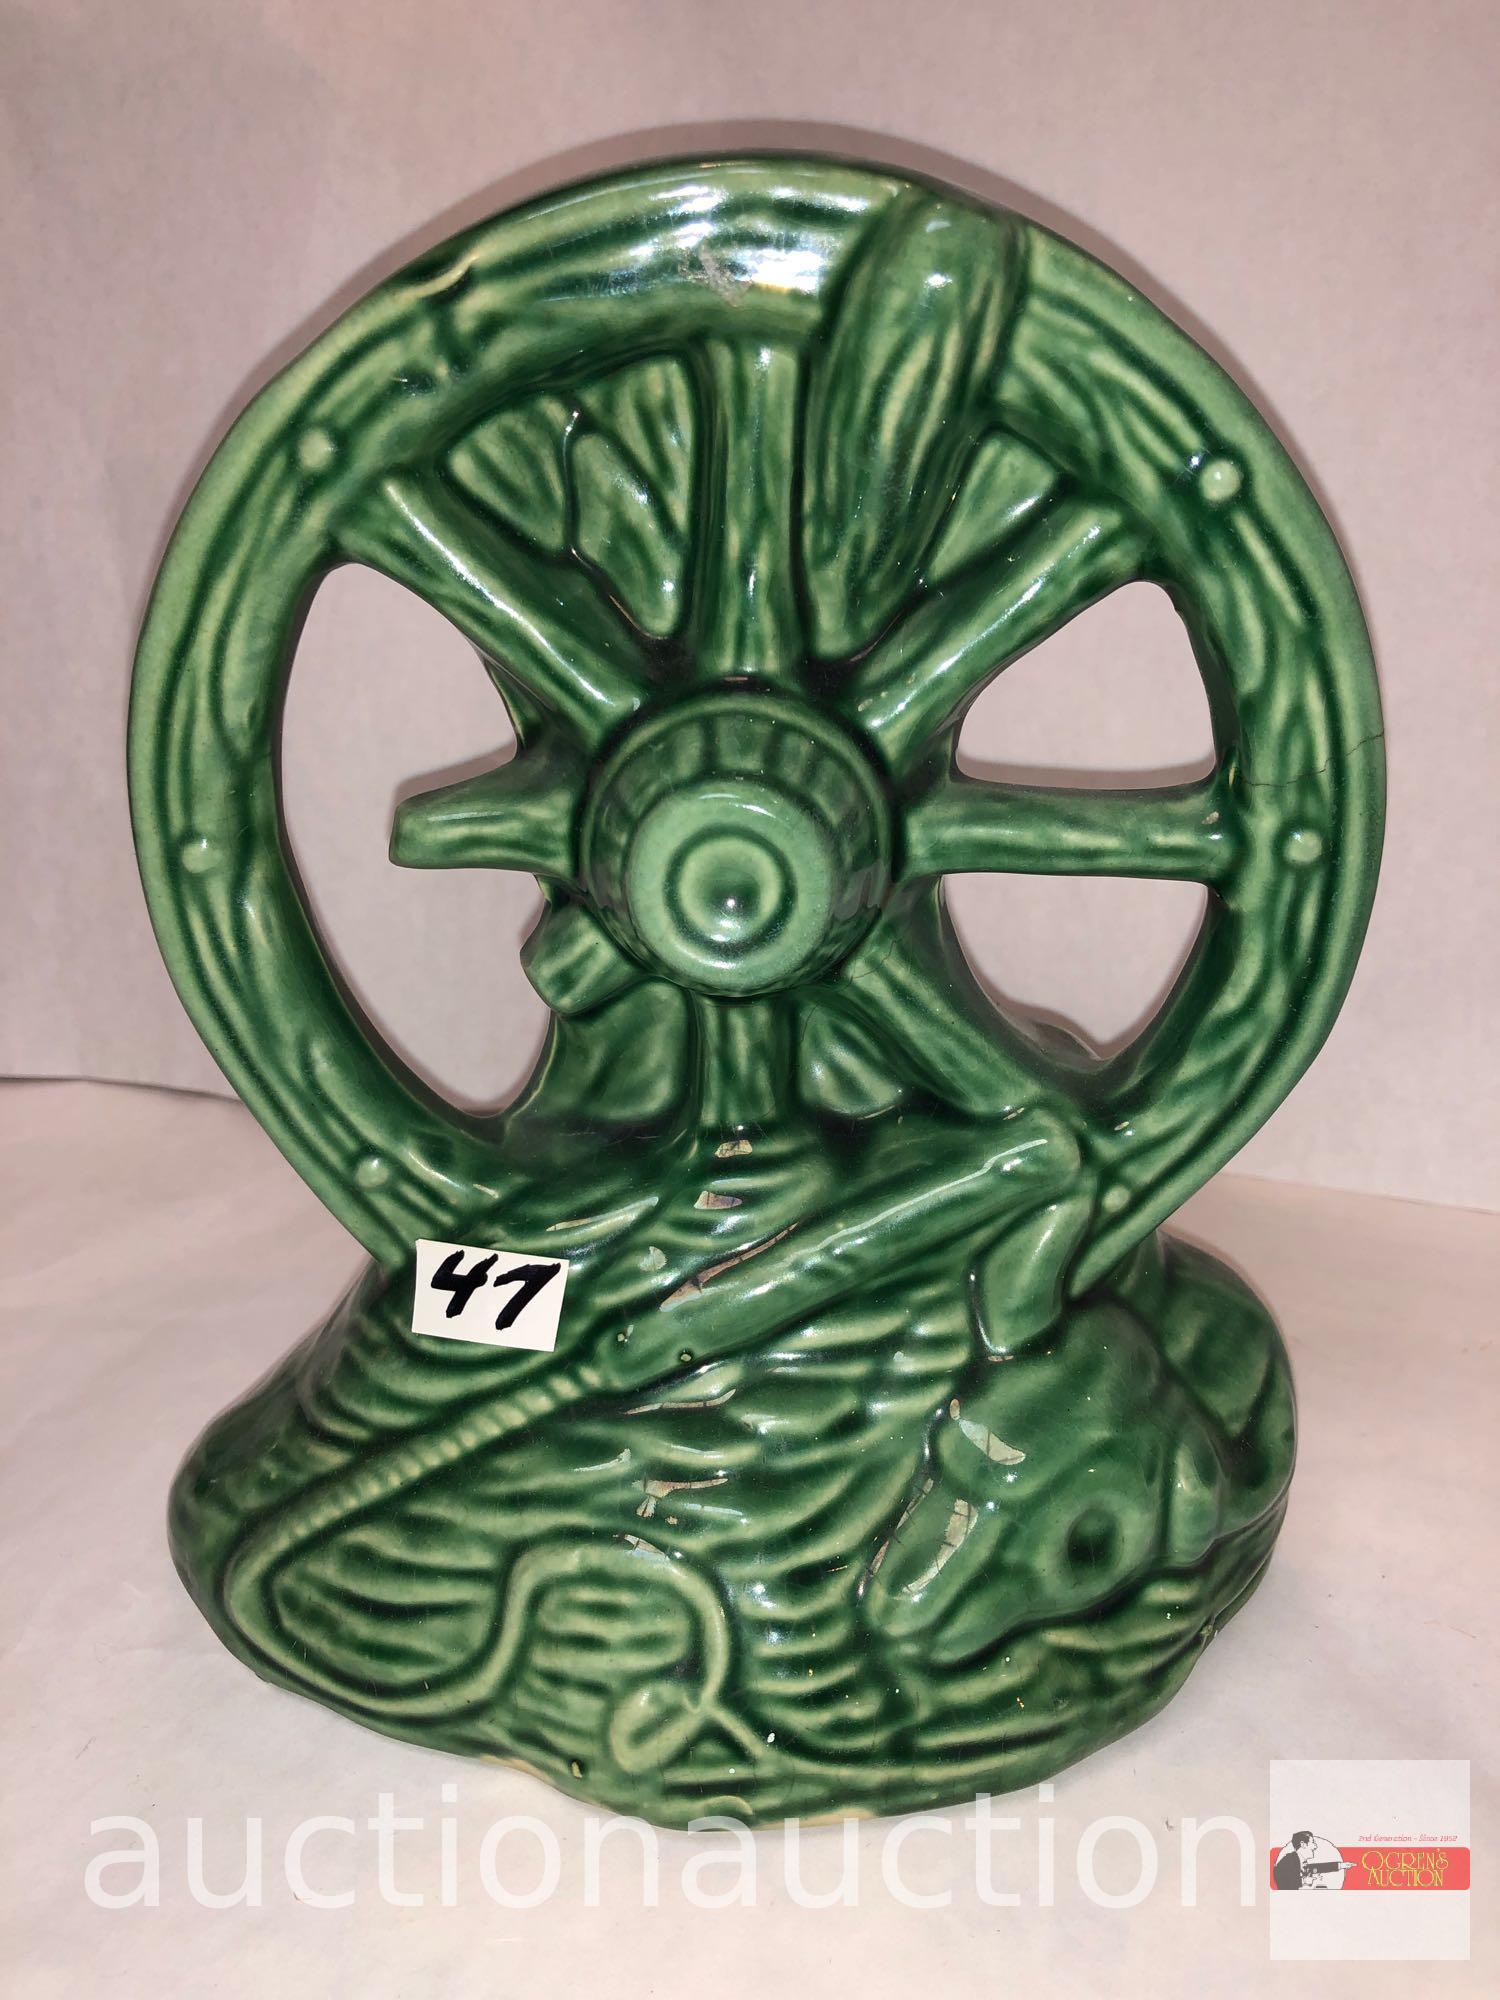 Pottery - wagon wheel green planter and yellow/brown vase